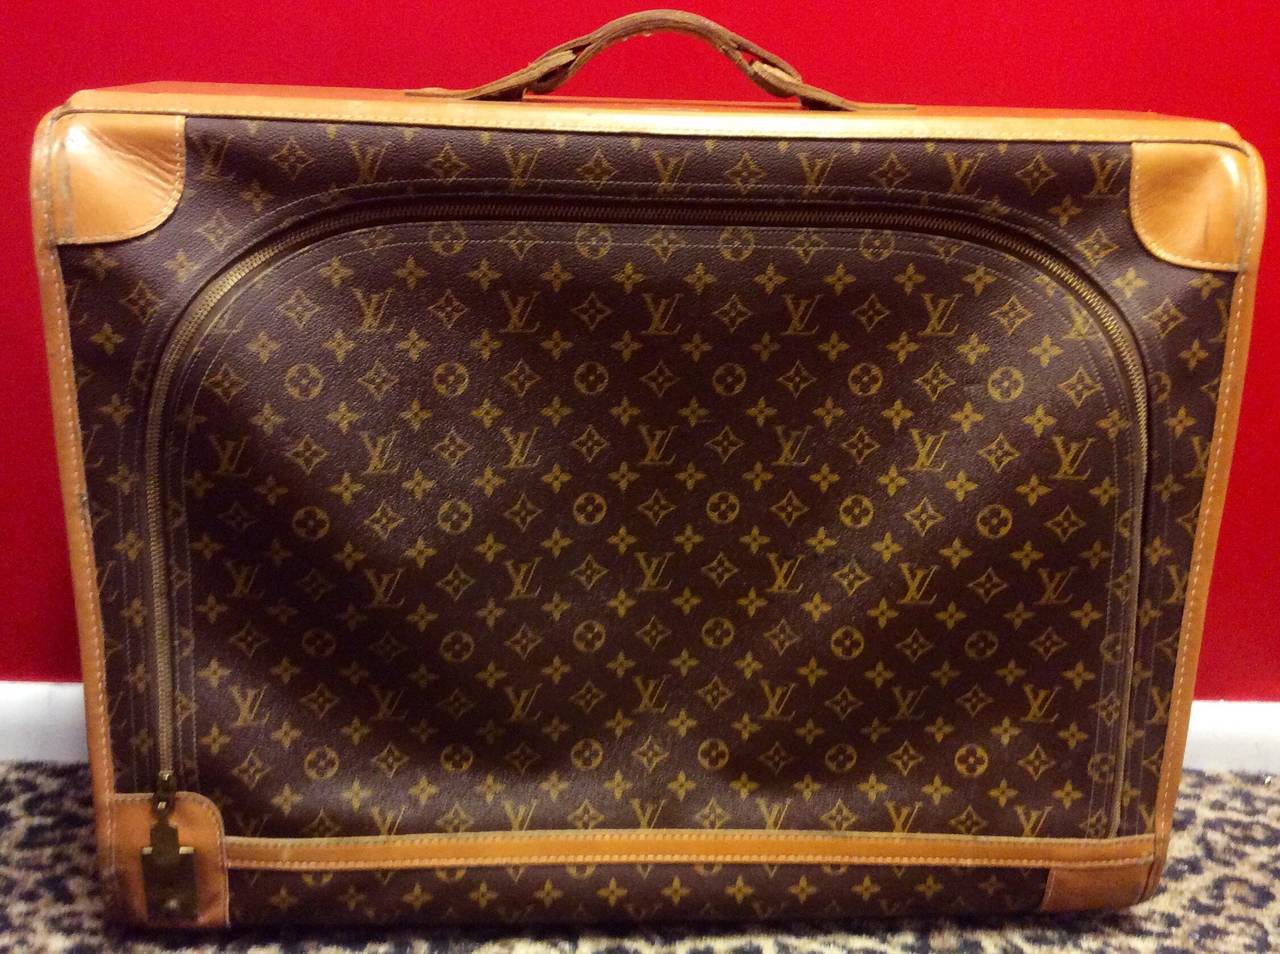 This is a vintage Louis Vuitton French Company monogram zip around luggage
Measurements:
25.5